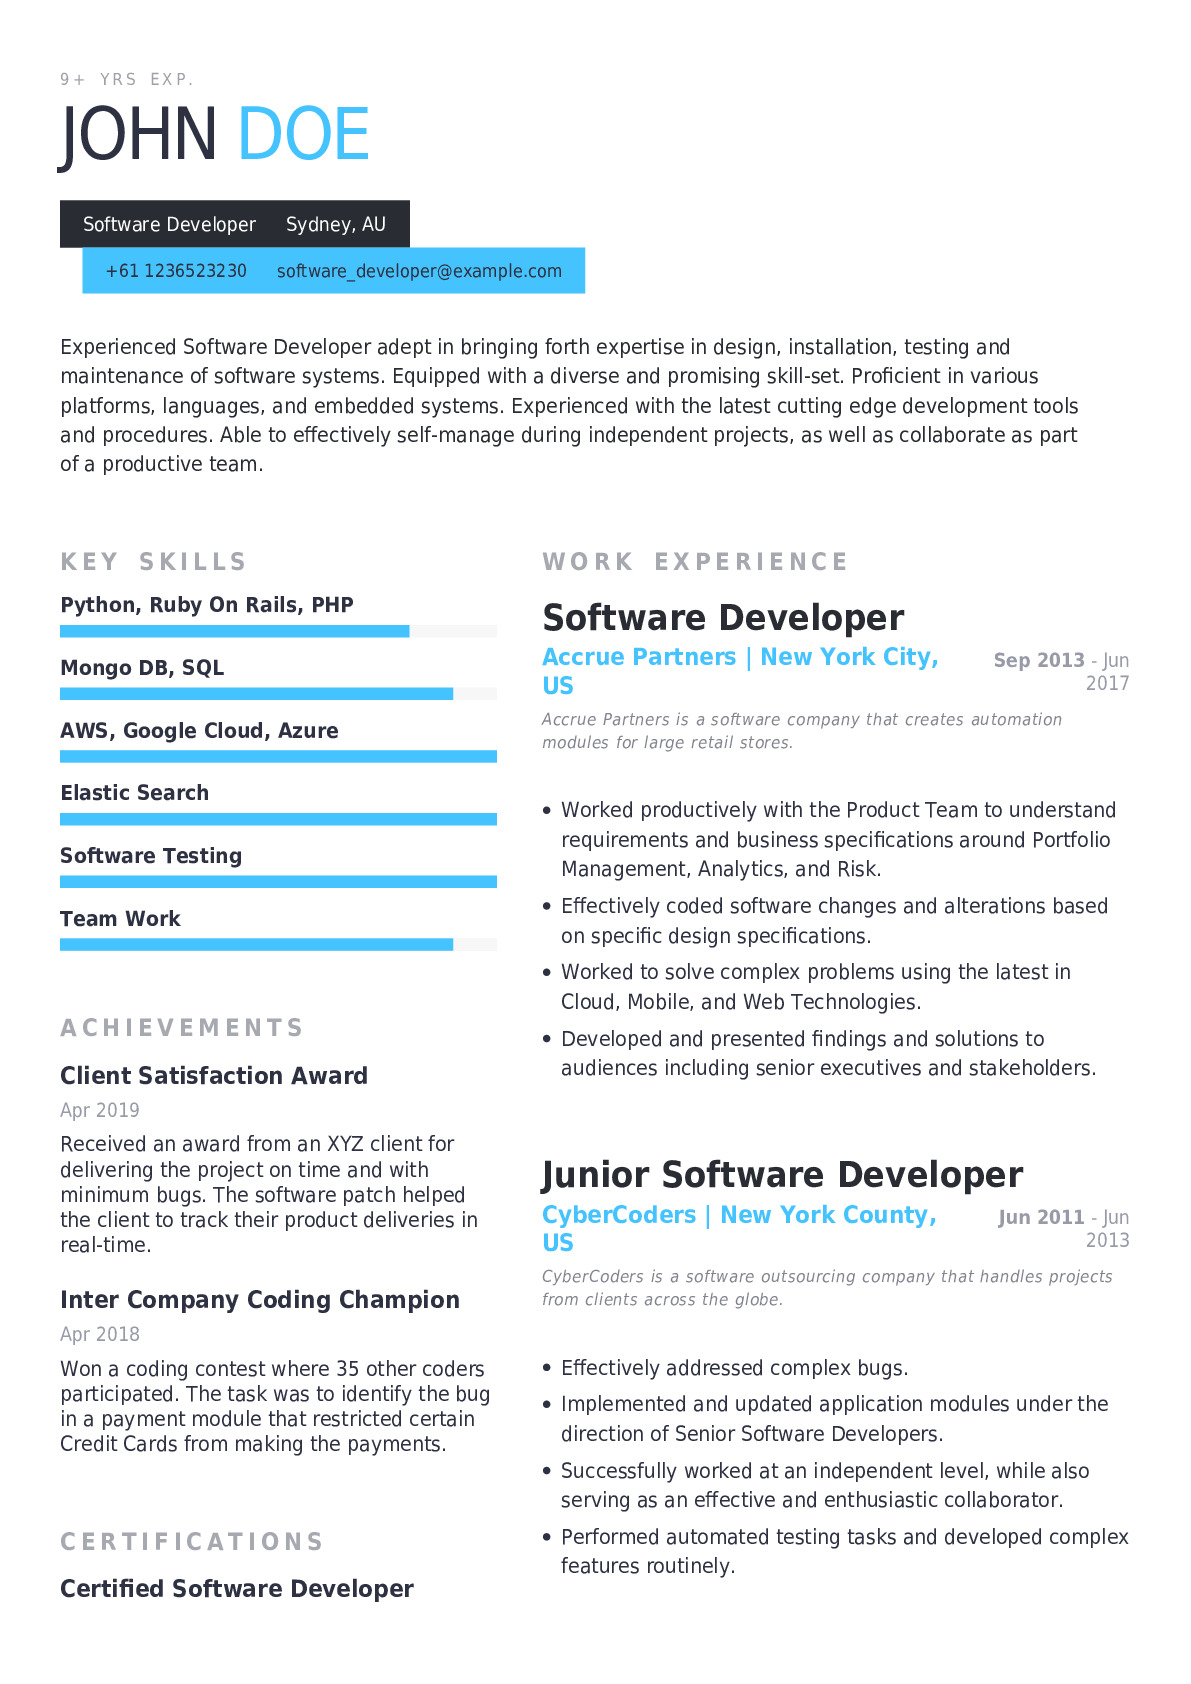 Software Developer Resume Example with PreFilled Content for Professionals